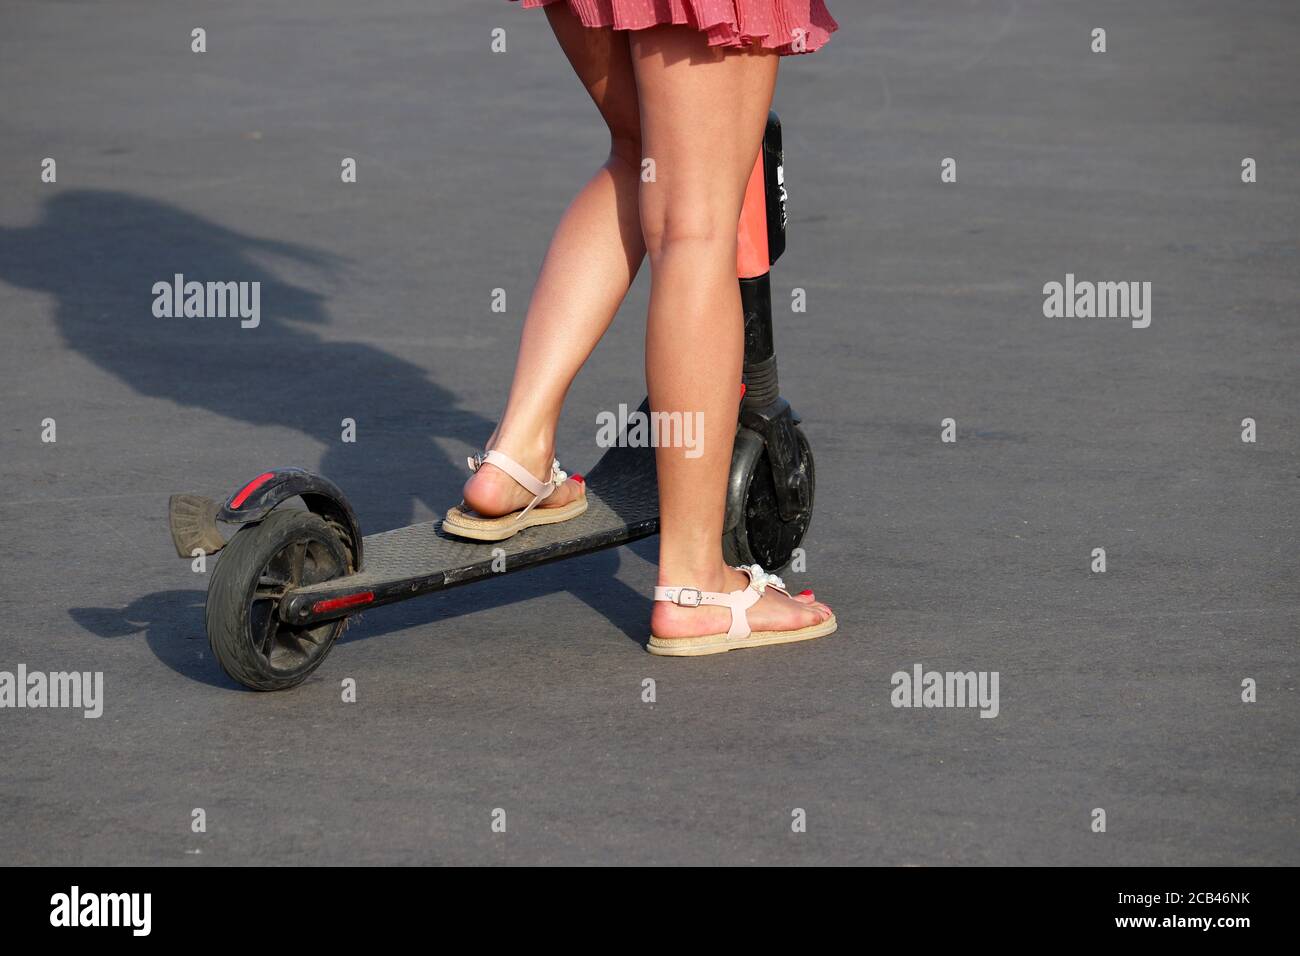 Girl rides an electric scooter on a city street, slim female legs on asphalt. Riding e-scooter in summer Stock Photo